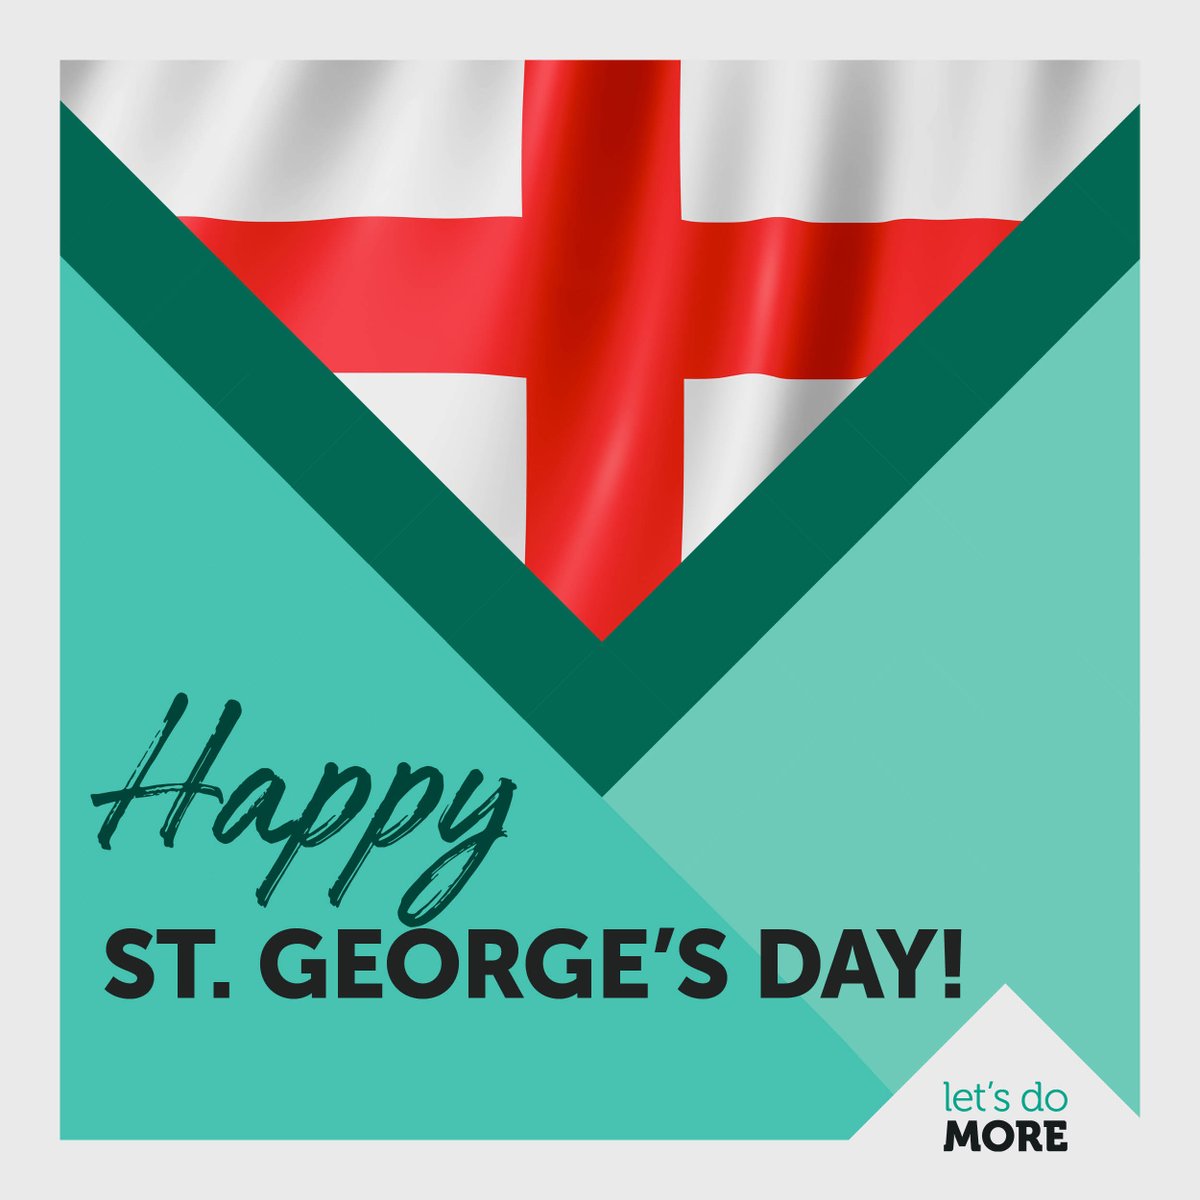 Happy St. George's Day to all our members! #StGeorgesDay